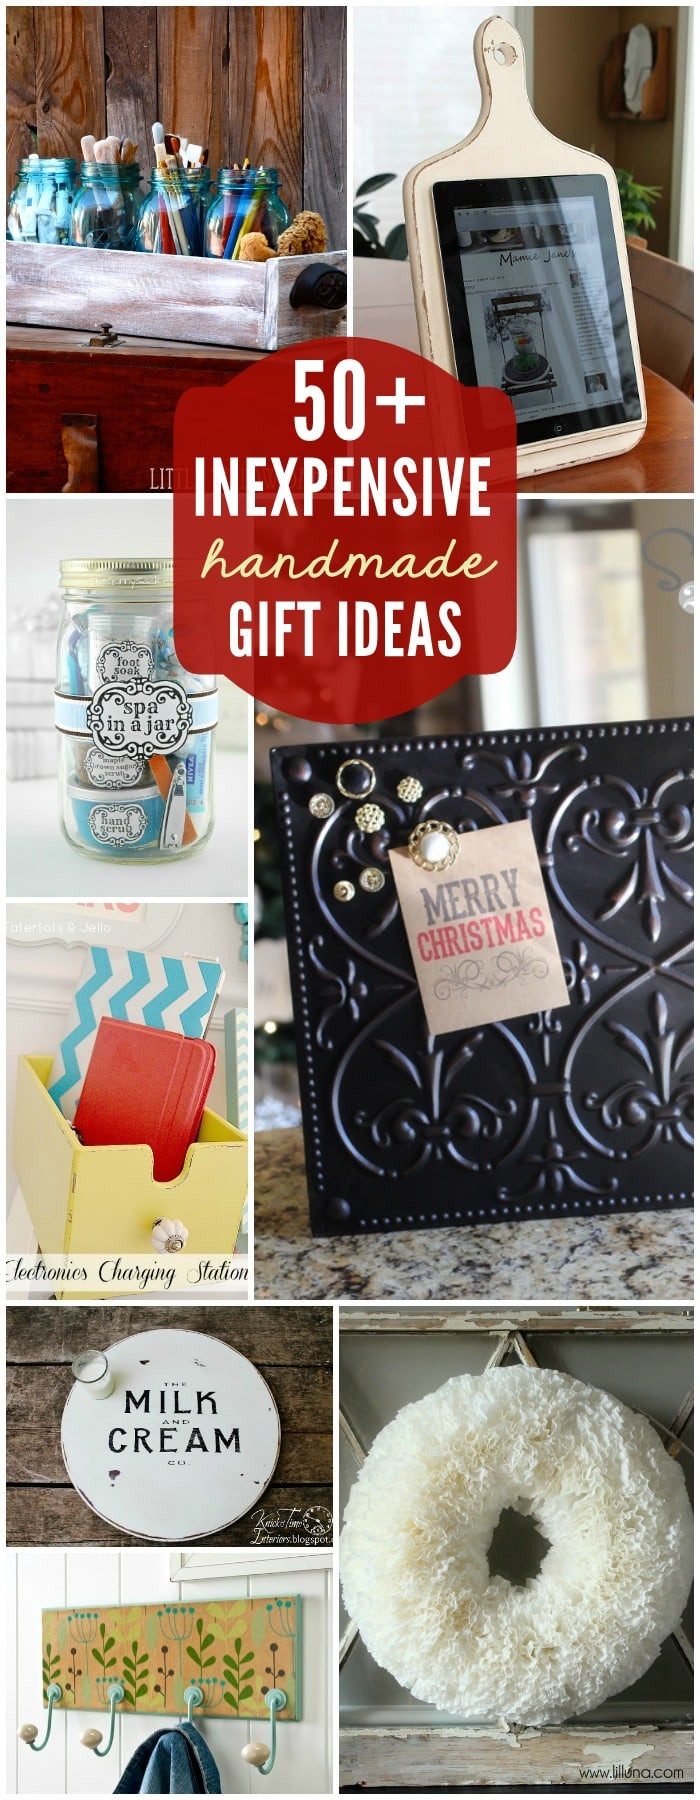 DIY Projects For Christmas Gifts
 Easy DIY Gift Ideas